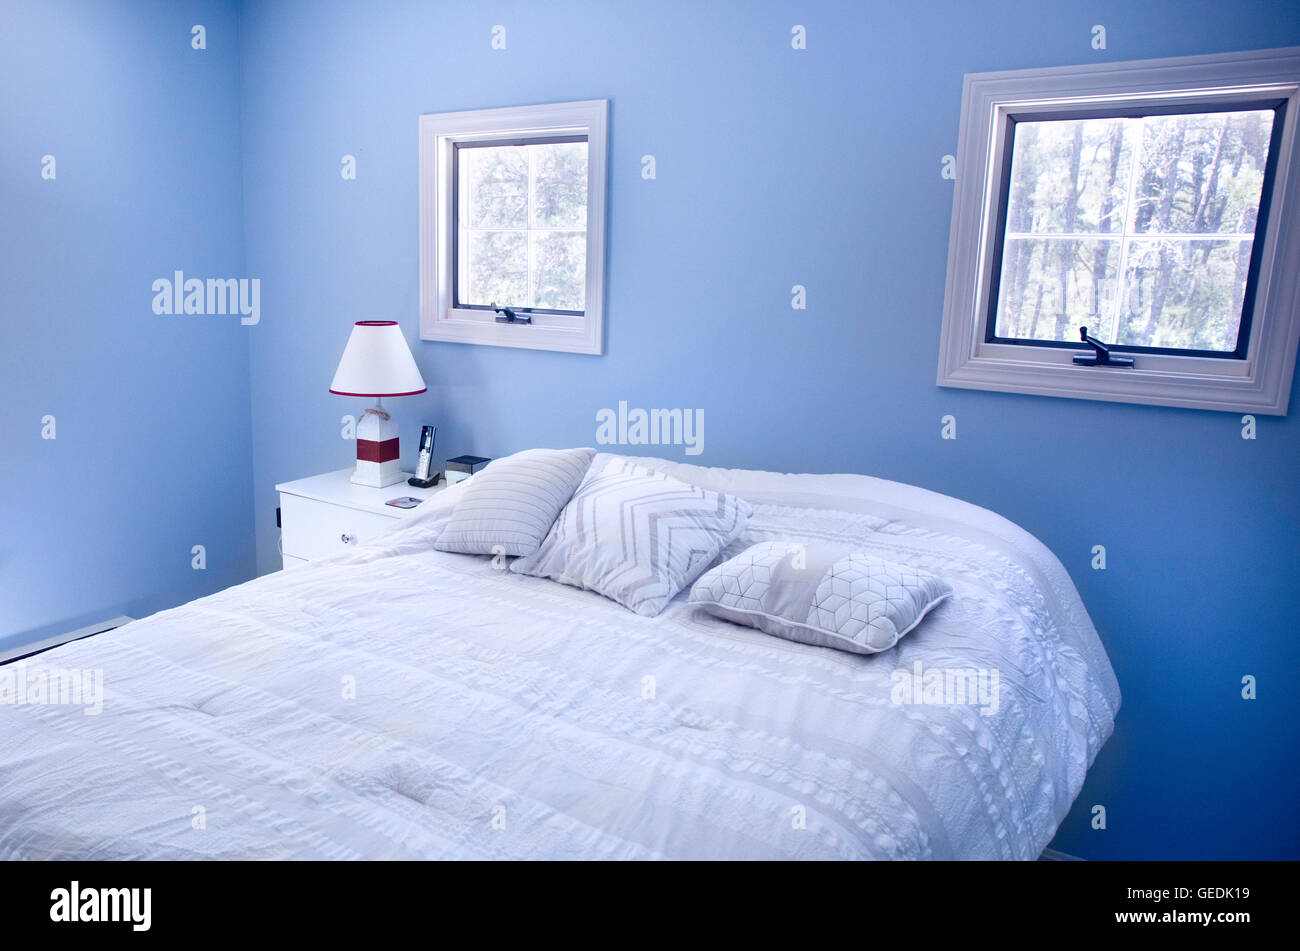 Bedroom With Blue Walls And Windows In Wellfleet Ma On Cape